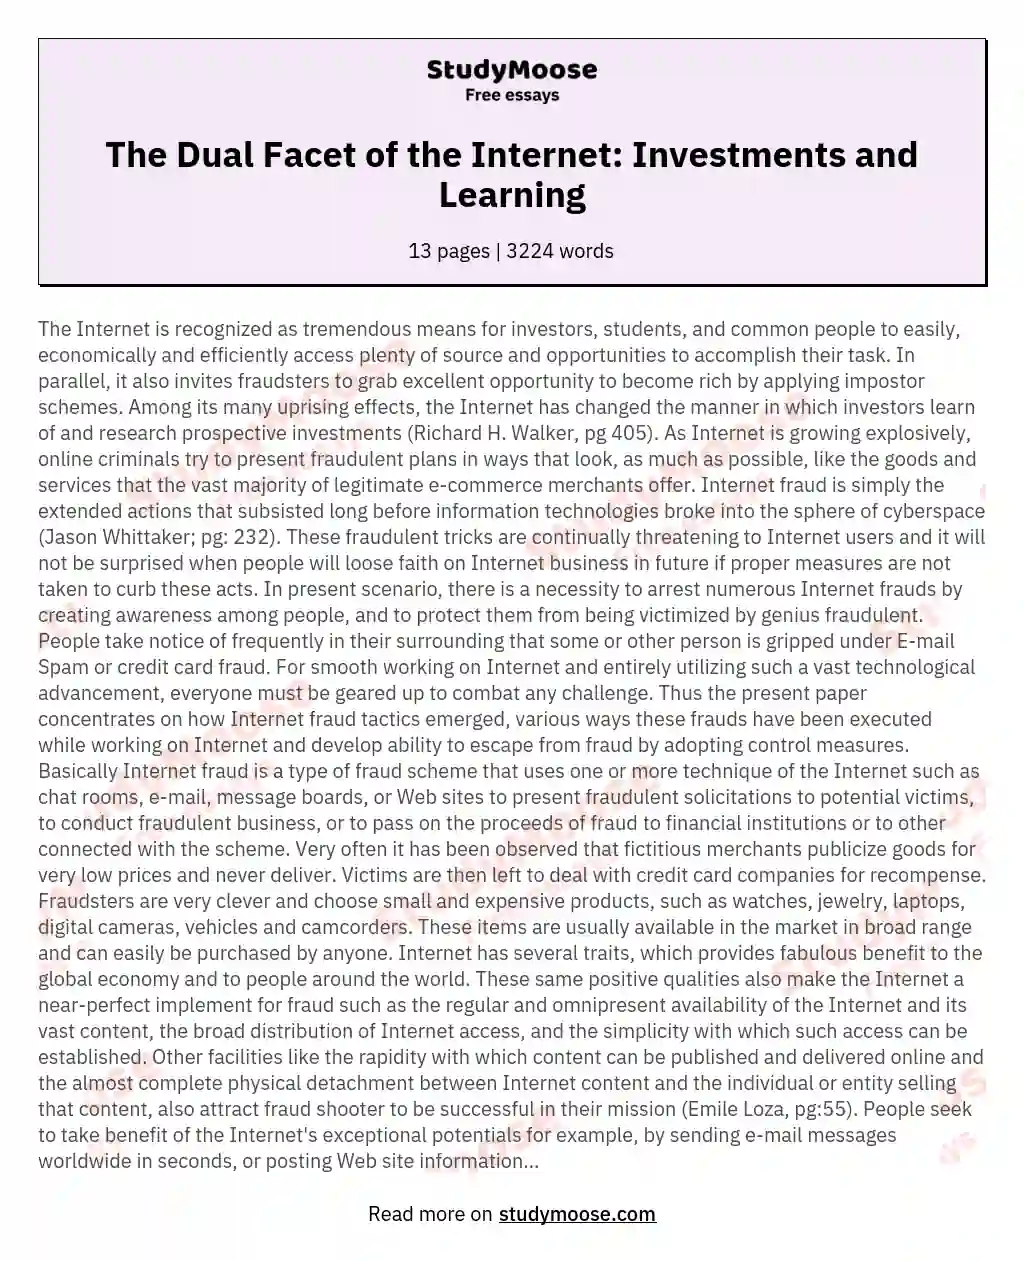 The Dual Facet of the Internet: Investments and Learning essay